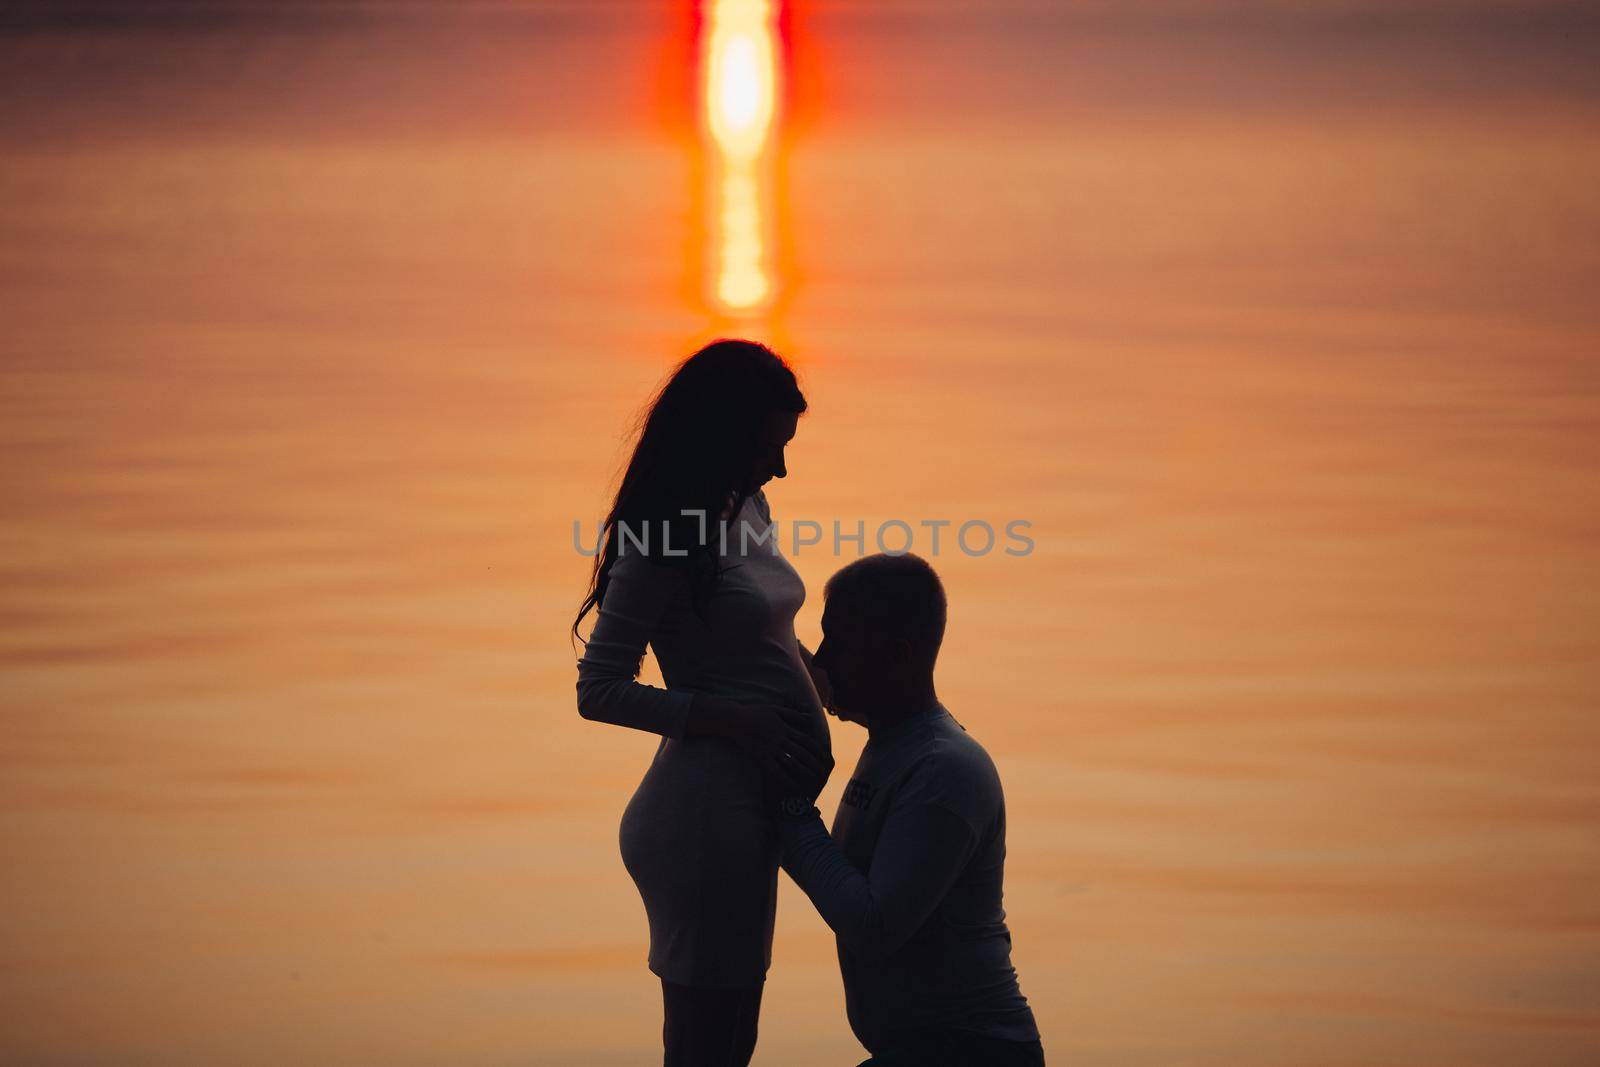 Silhouette of pregnant woman and her husband against sunset by the sea. Man is embracing and kissing her belly. Expecting a baby concept. Evening by the water.